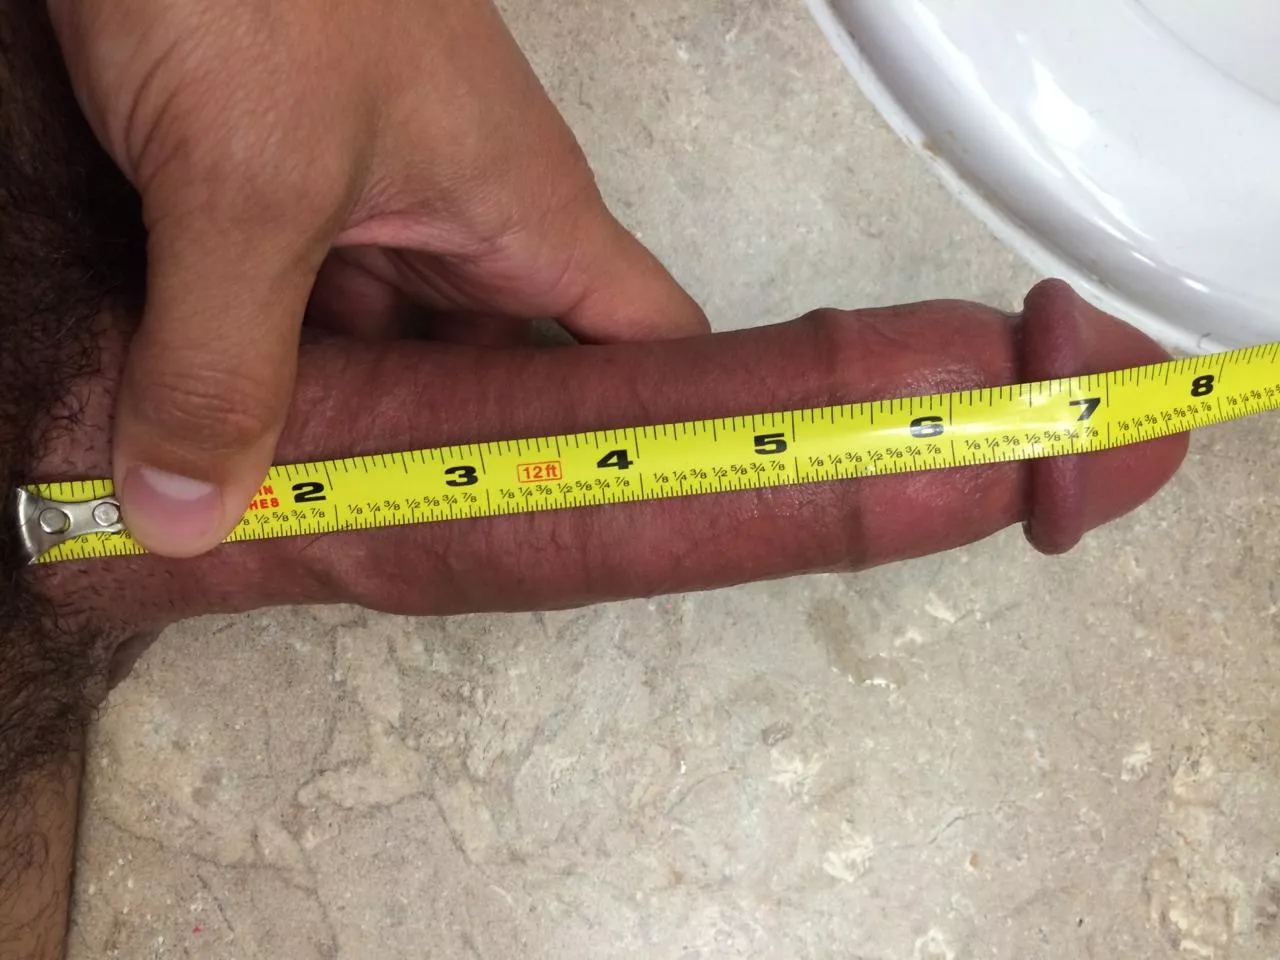 1280px x 960px - My long fat and heavy cock vs tape measure nudes in cockcompare |  Onlynudes.org